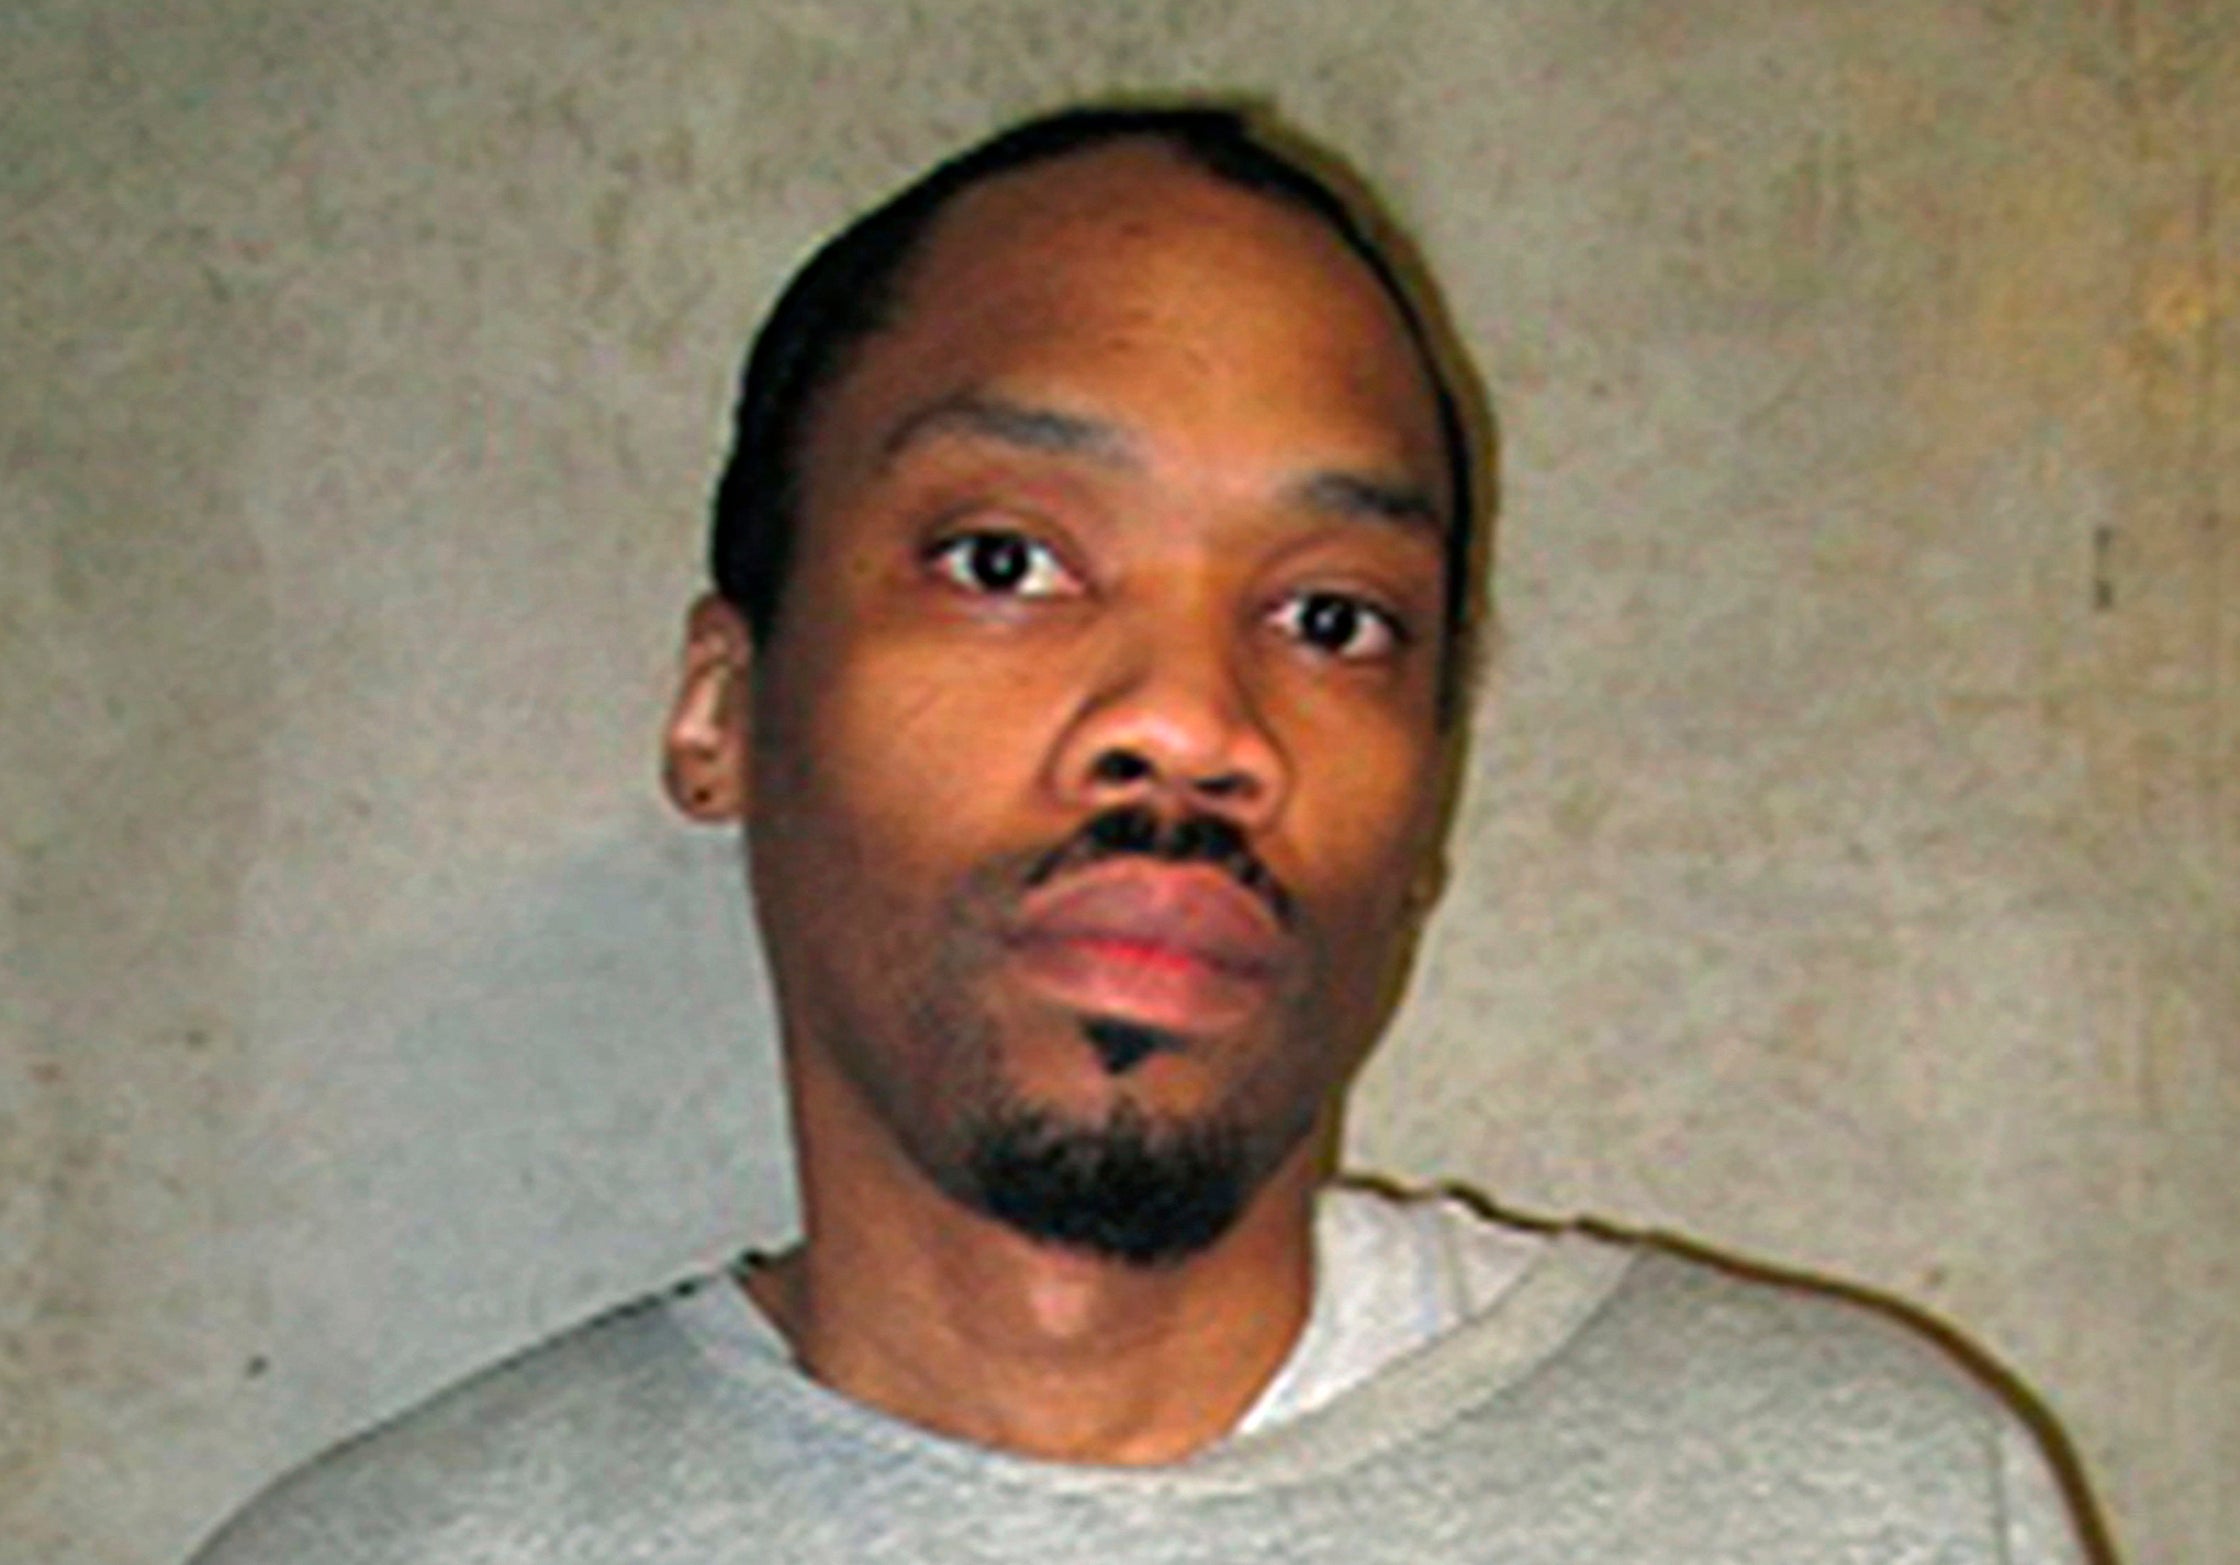 This Feb. 5, 2018, file photo provided by the Oklahoma Department of Corrections shows Julius Jones. On Monday, Oct. 25, 2021, a federal judge in Oklahoma said the state can move forward with scheduled lethal injections for five death row inmates, including Jones whose case and death sentence has drawn international attention. Attorneys for the inmates have promised to appeal the judge's ruling.